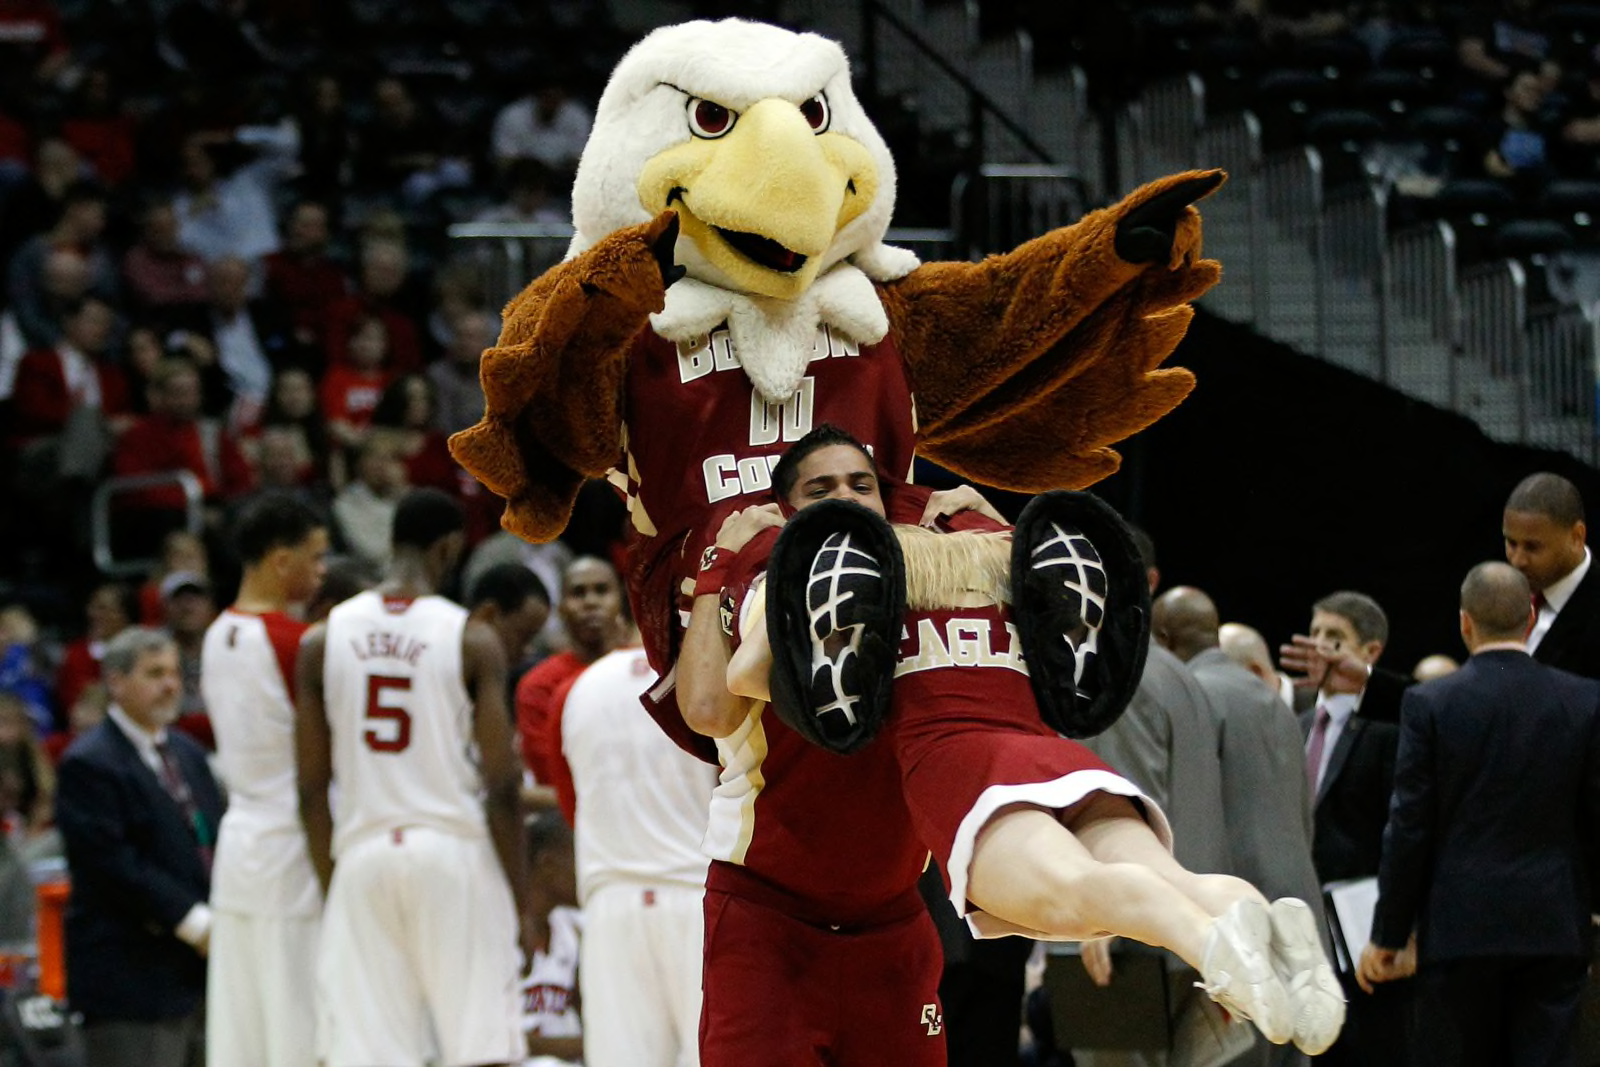 Boston College Eagles Men's Basketball: Previewing the Louisville